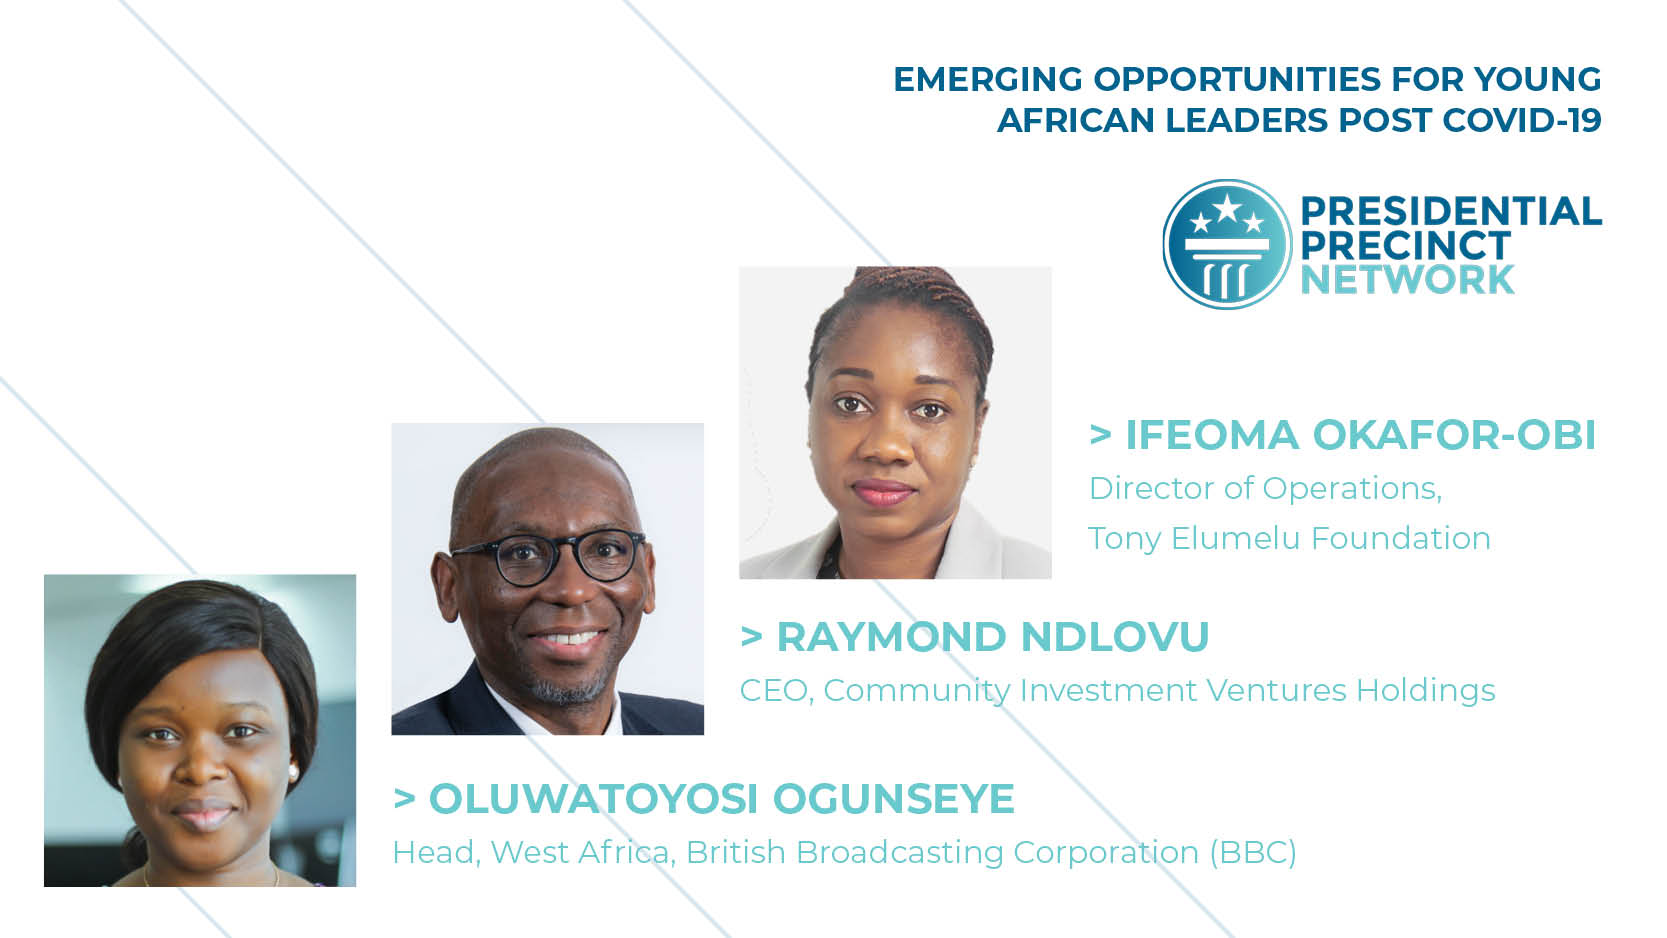 Global Founders | Emerging Opportunities for Young African Leaders